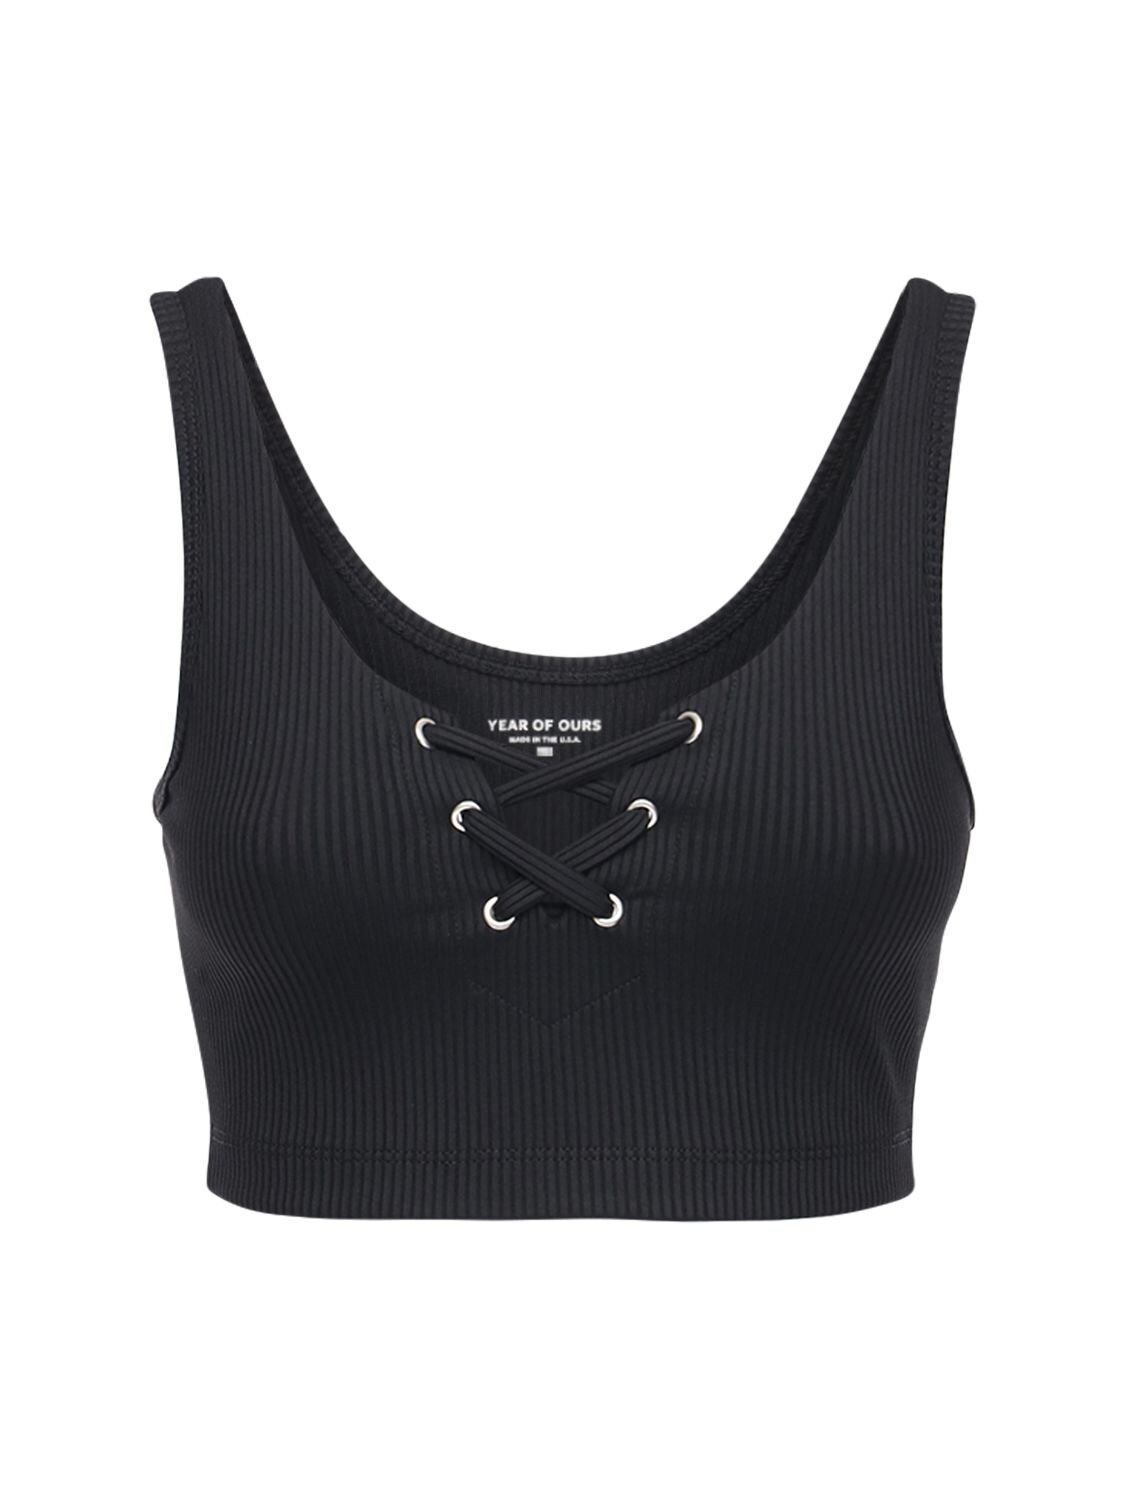 YEAR OF OURS RIBBED FOOTBALL BRA TOP